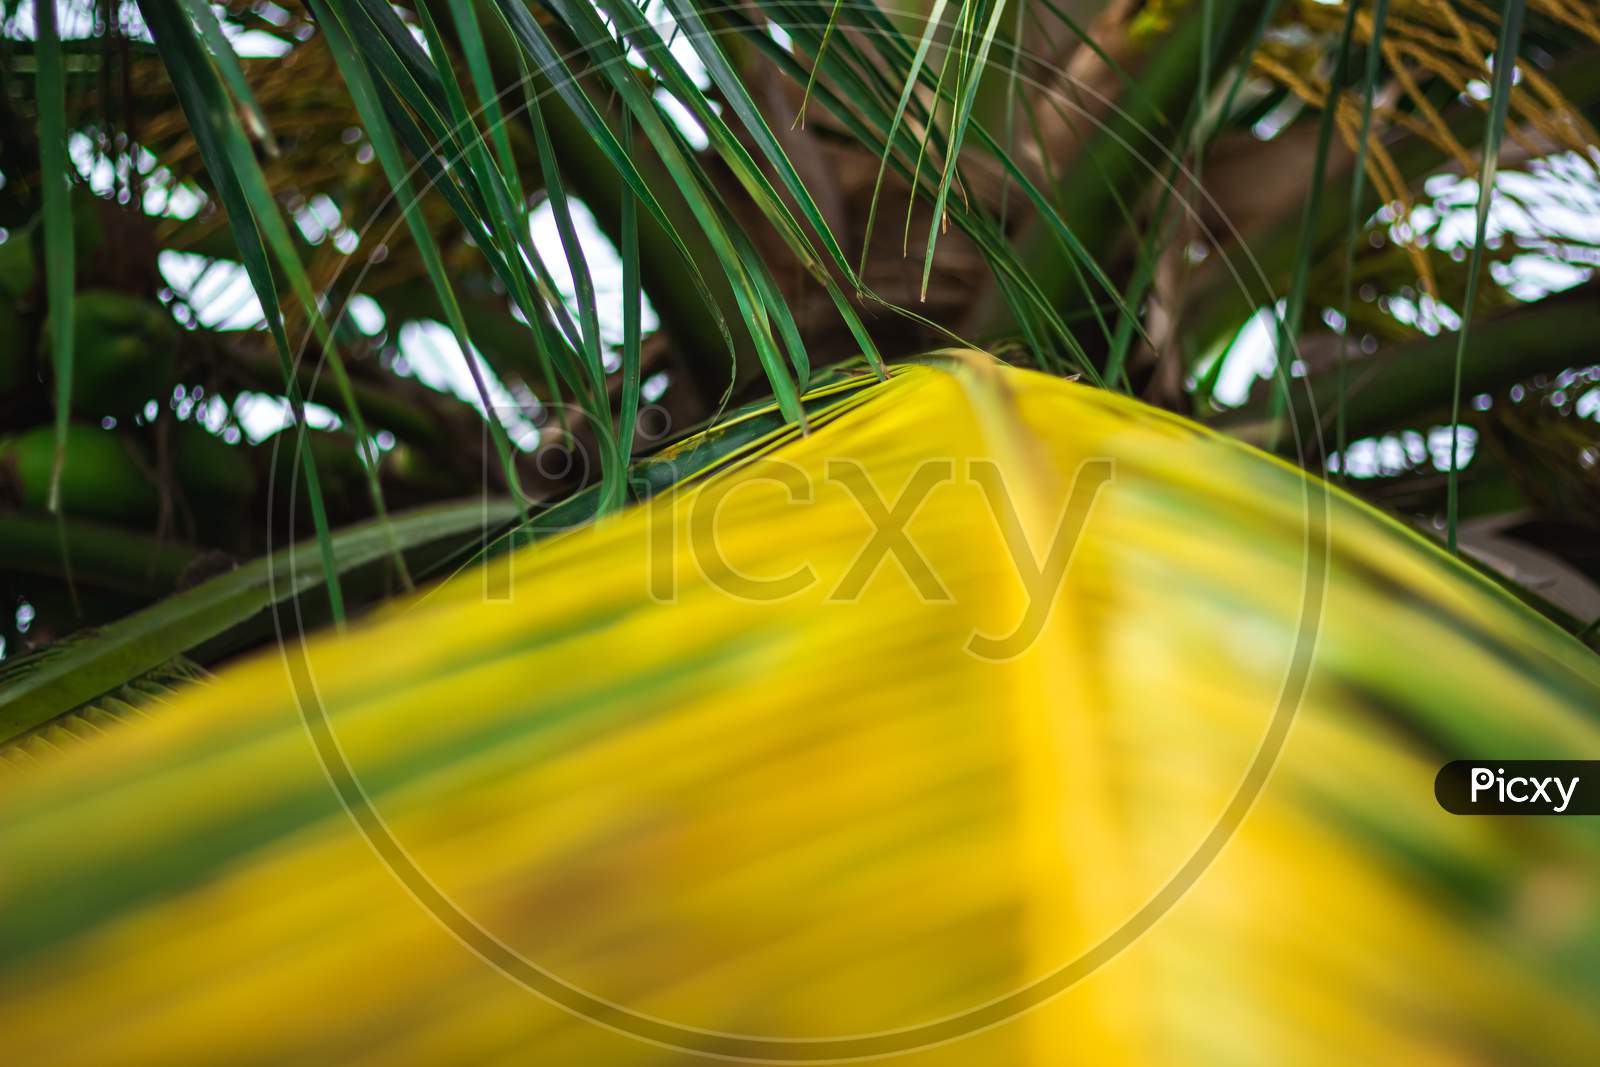 Green Coconut Leaf Straight Line Pattern Frame Isolated Background Of Coconut Tree. Its Help To Use For Shelter Of House On Villages And Coconut Leaves Use For Indian Festivals.